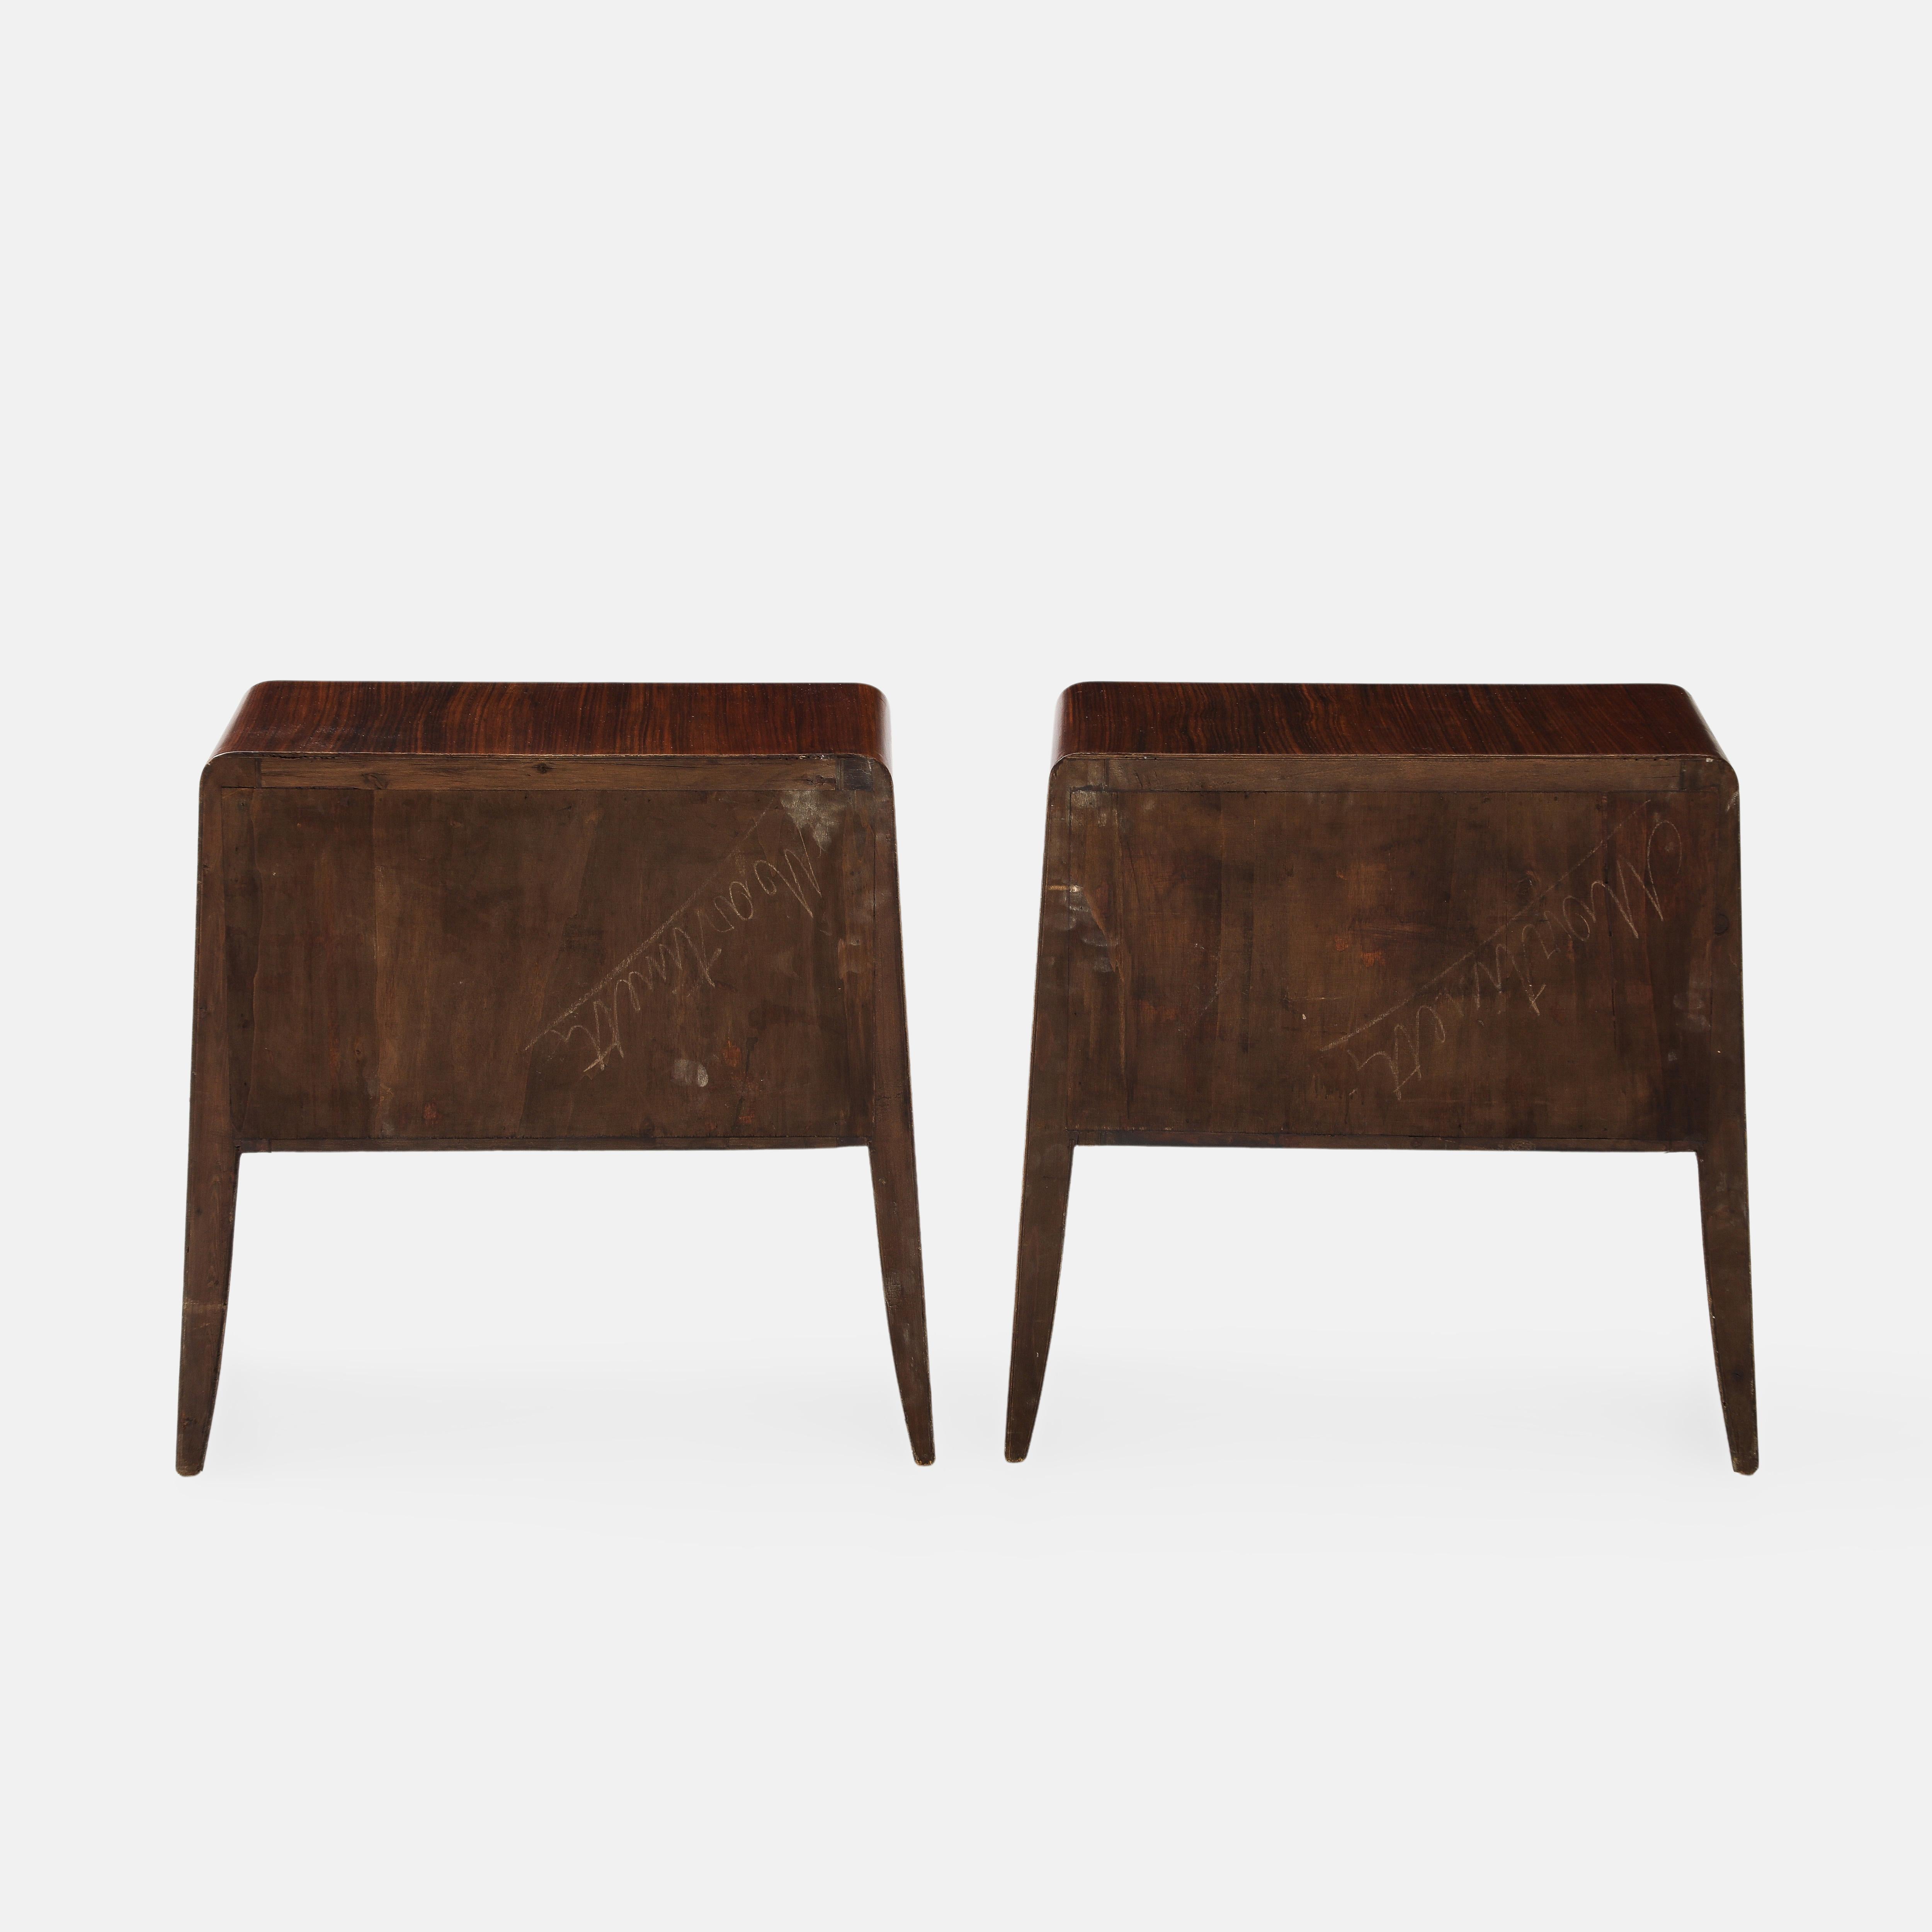 Mid-20th Century 1950s Pair of Rosewood and Birchwood Nightstands or Bedside Tables For Sale